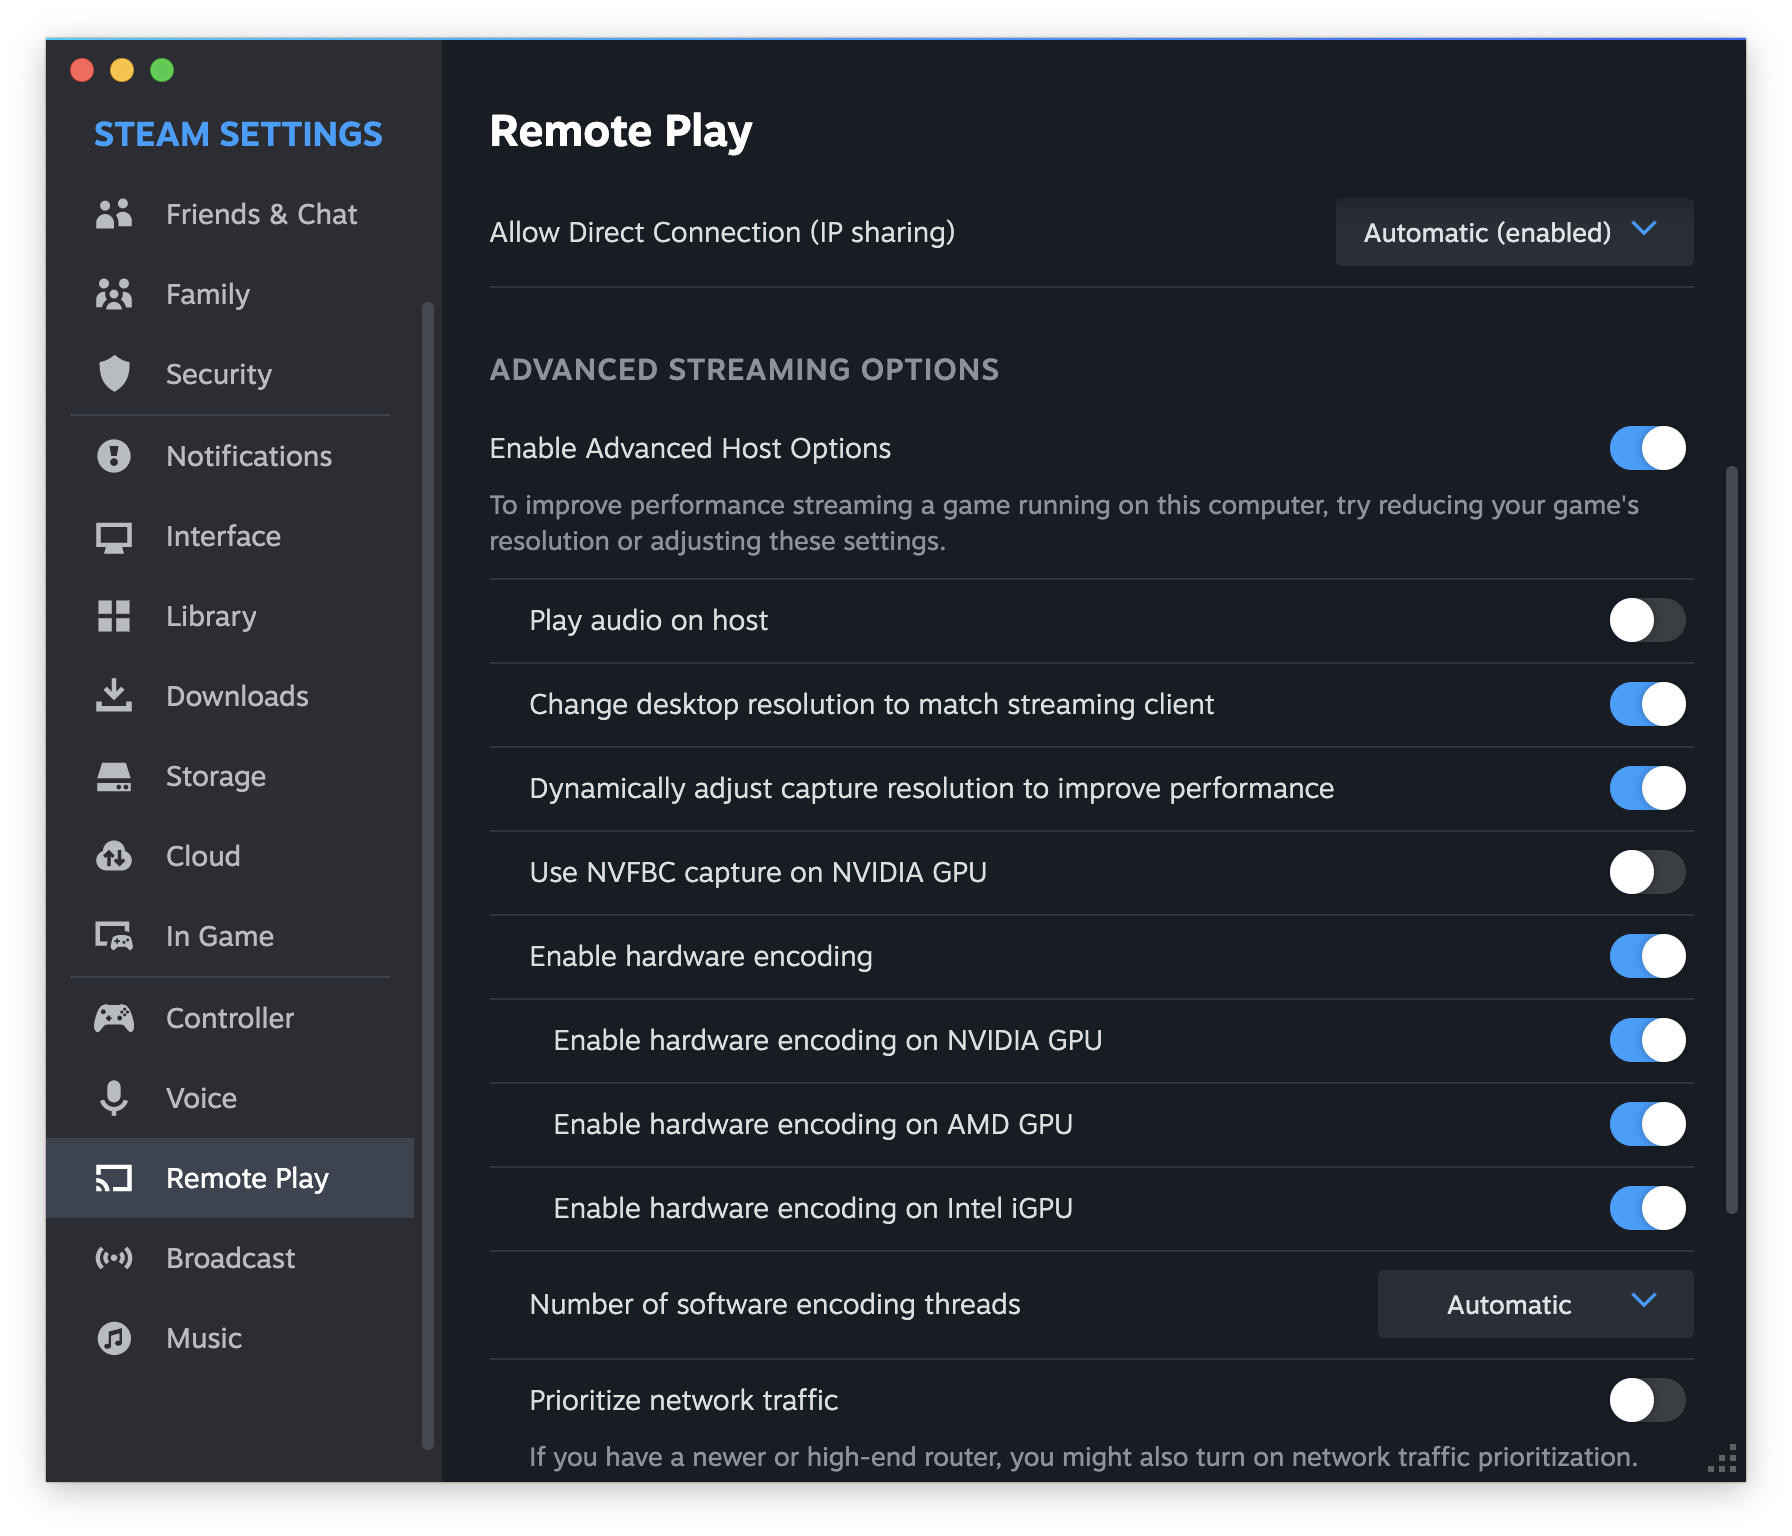 Screeshot showing Steam Remote Play Settings for Host.